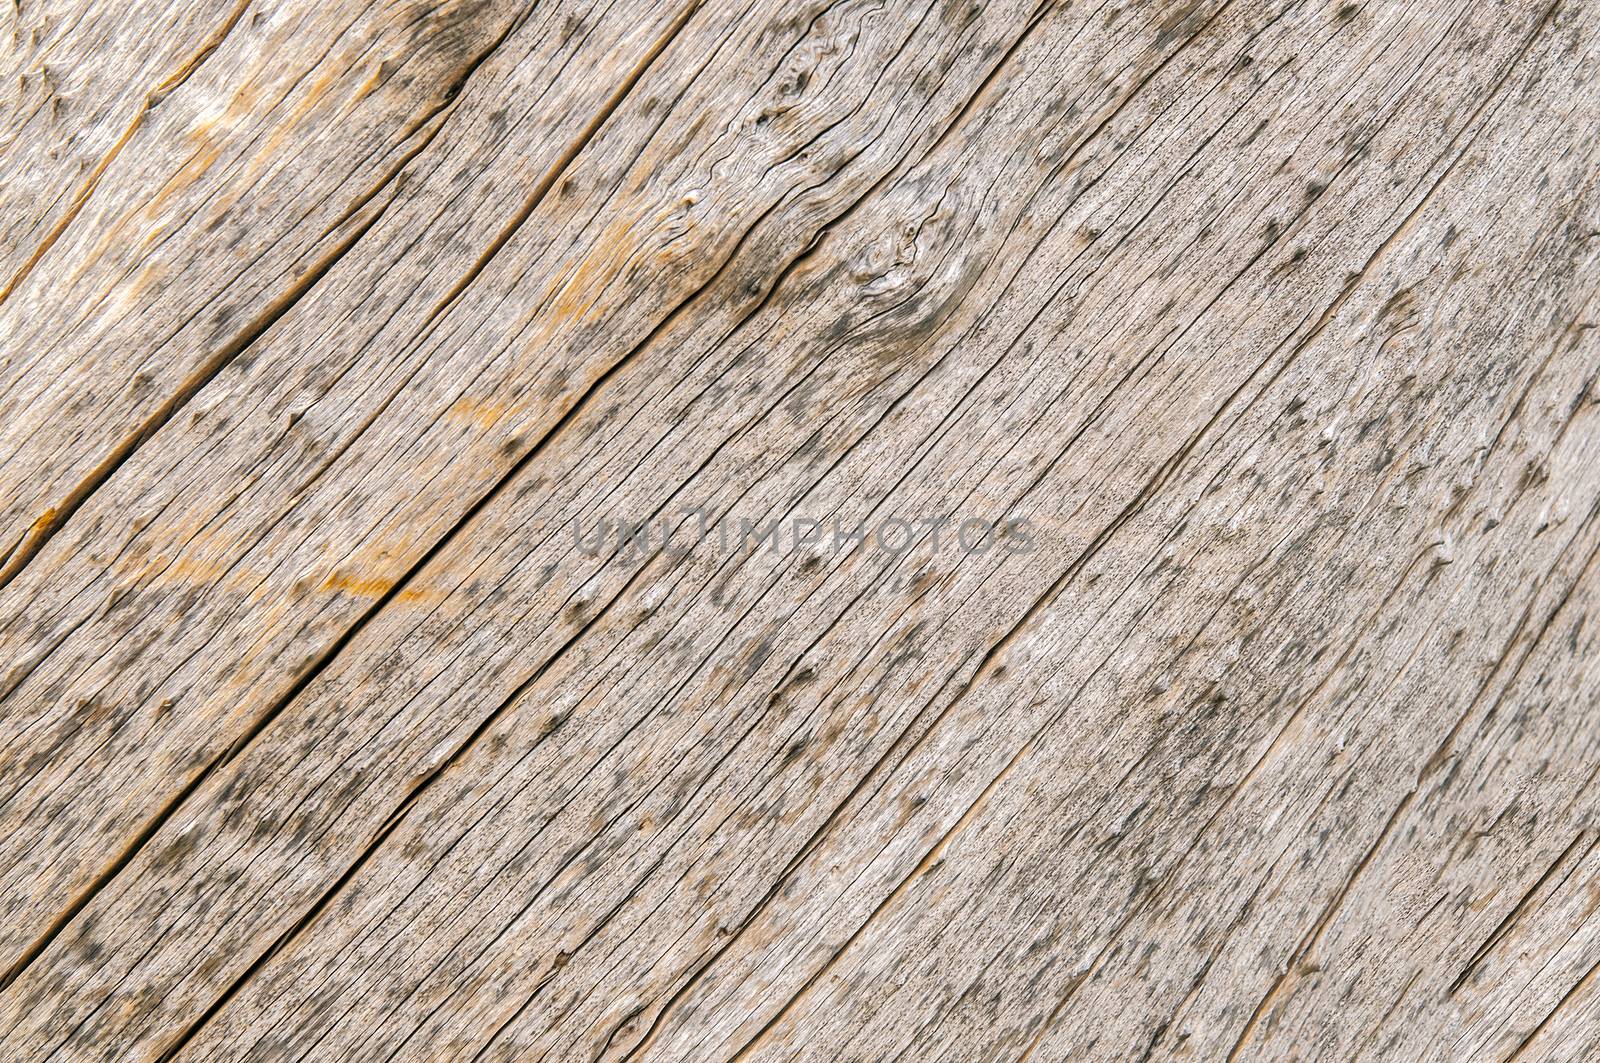 Wooden texture background for commercial use